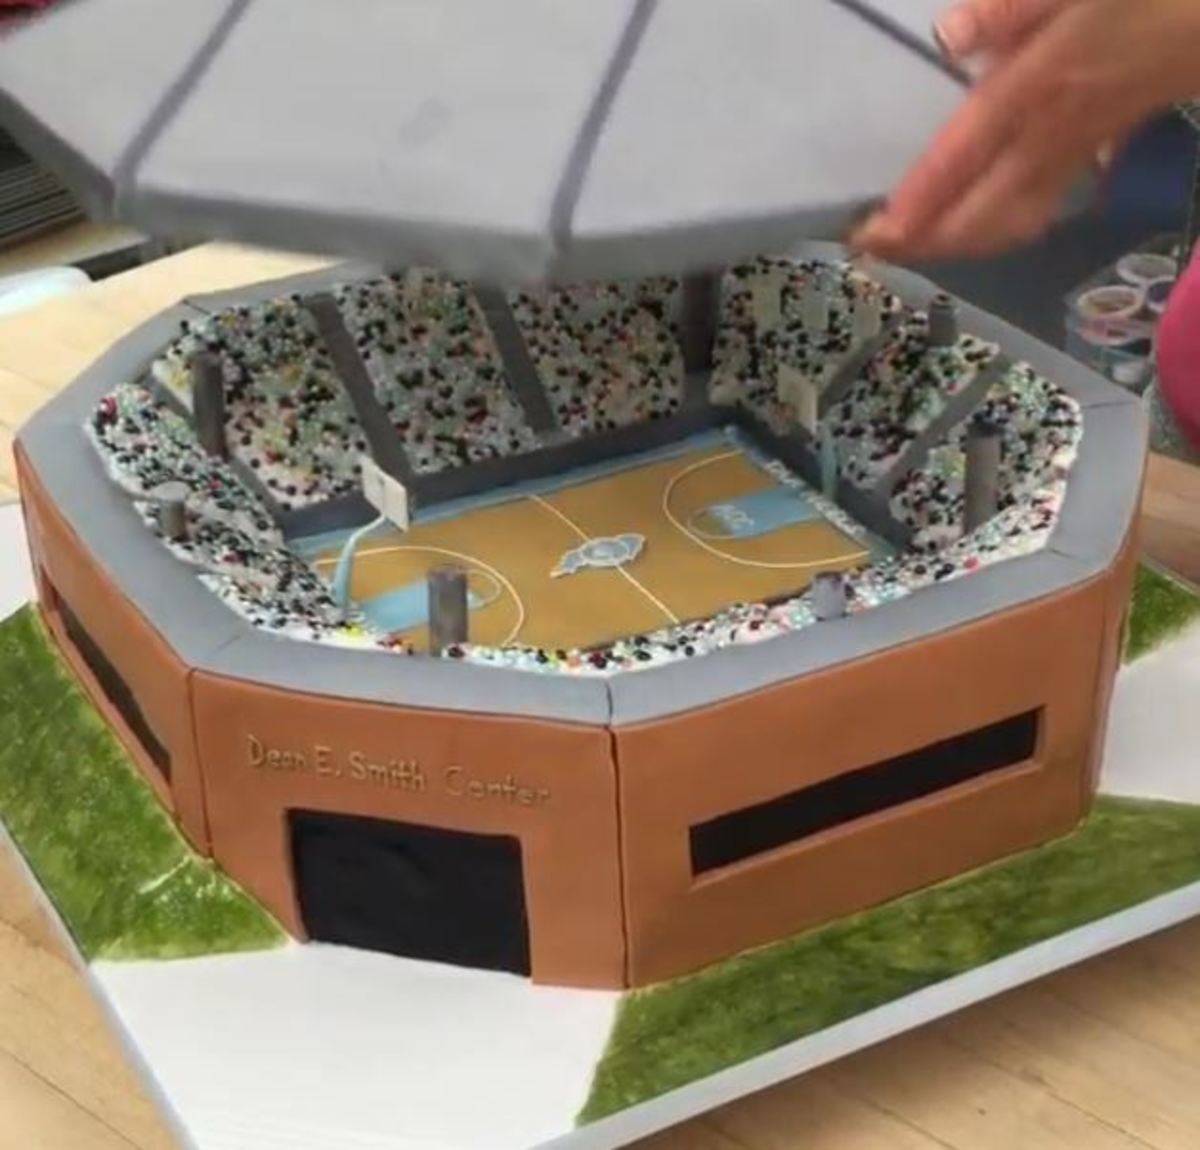 The inside of the Dean Dome cake is unveiled.